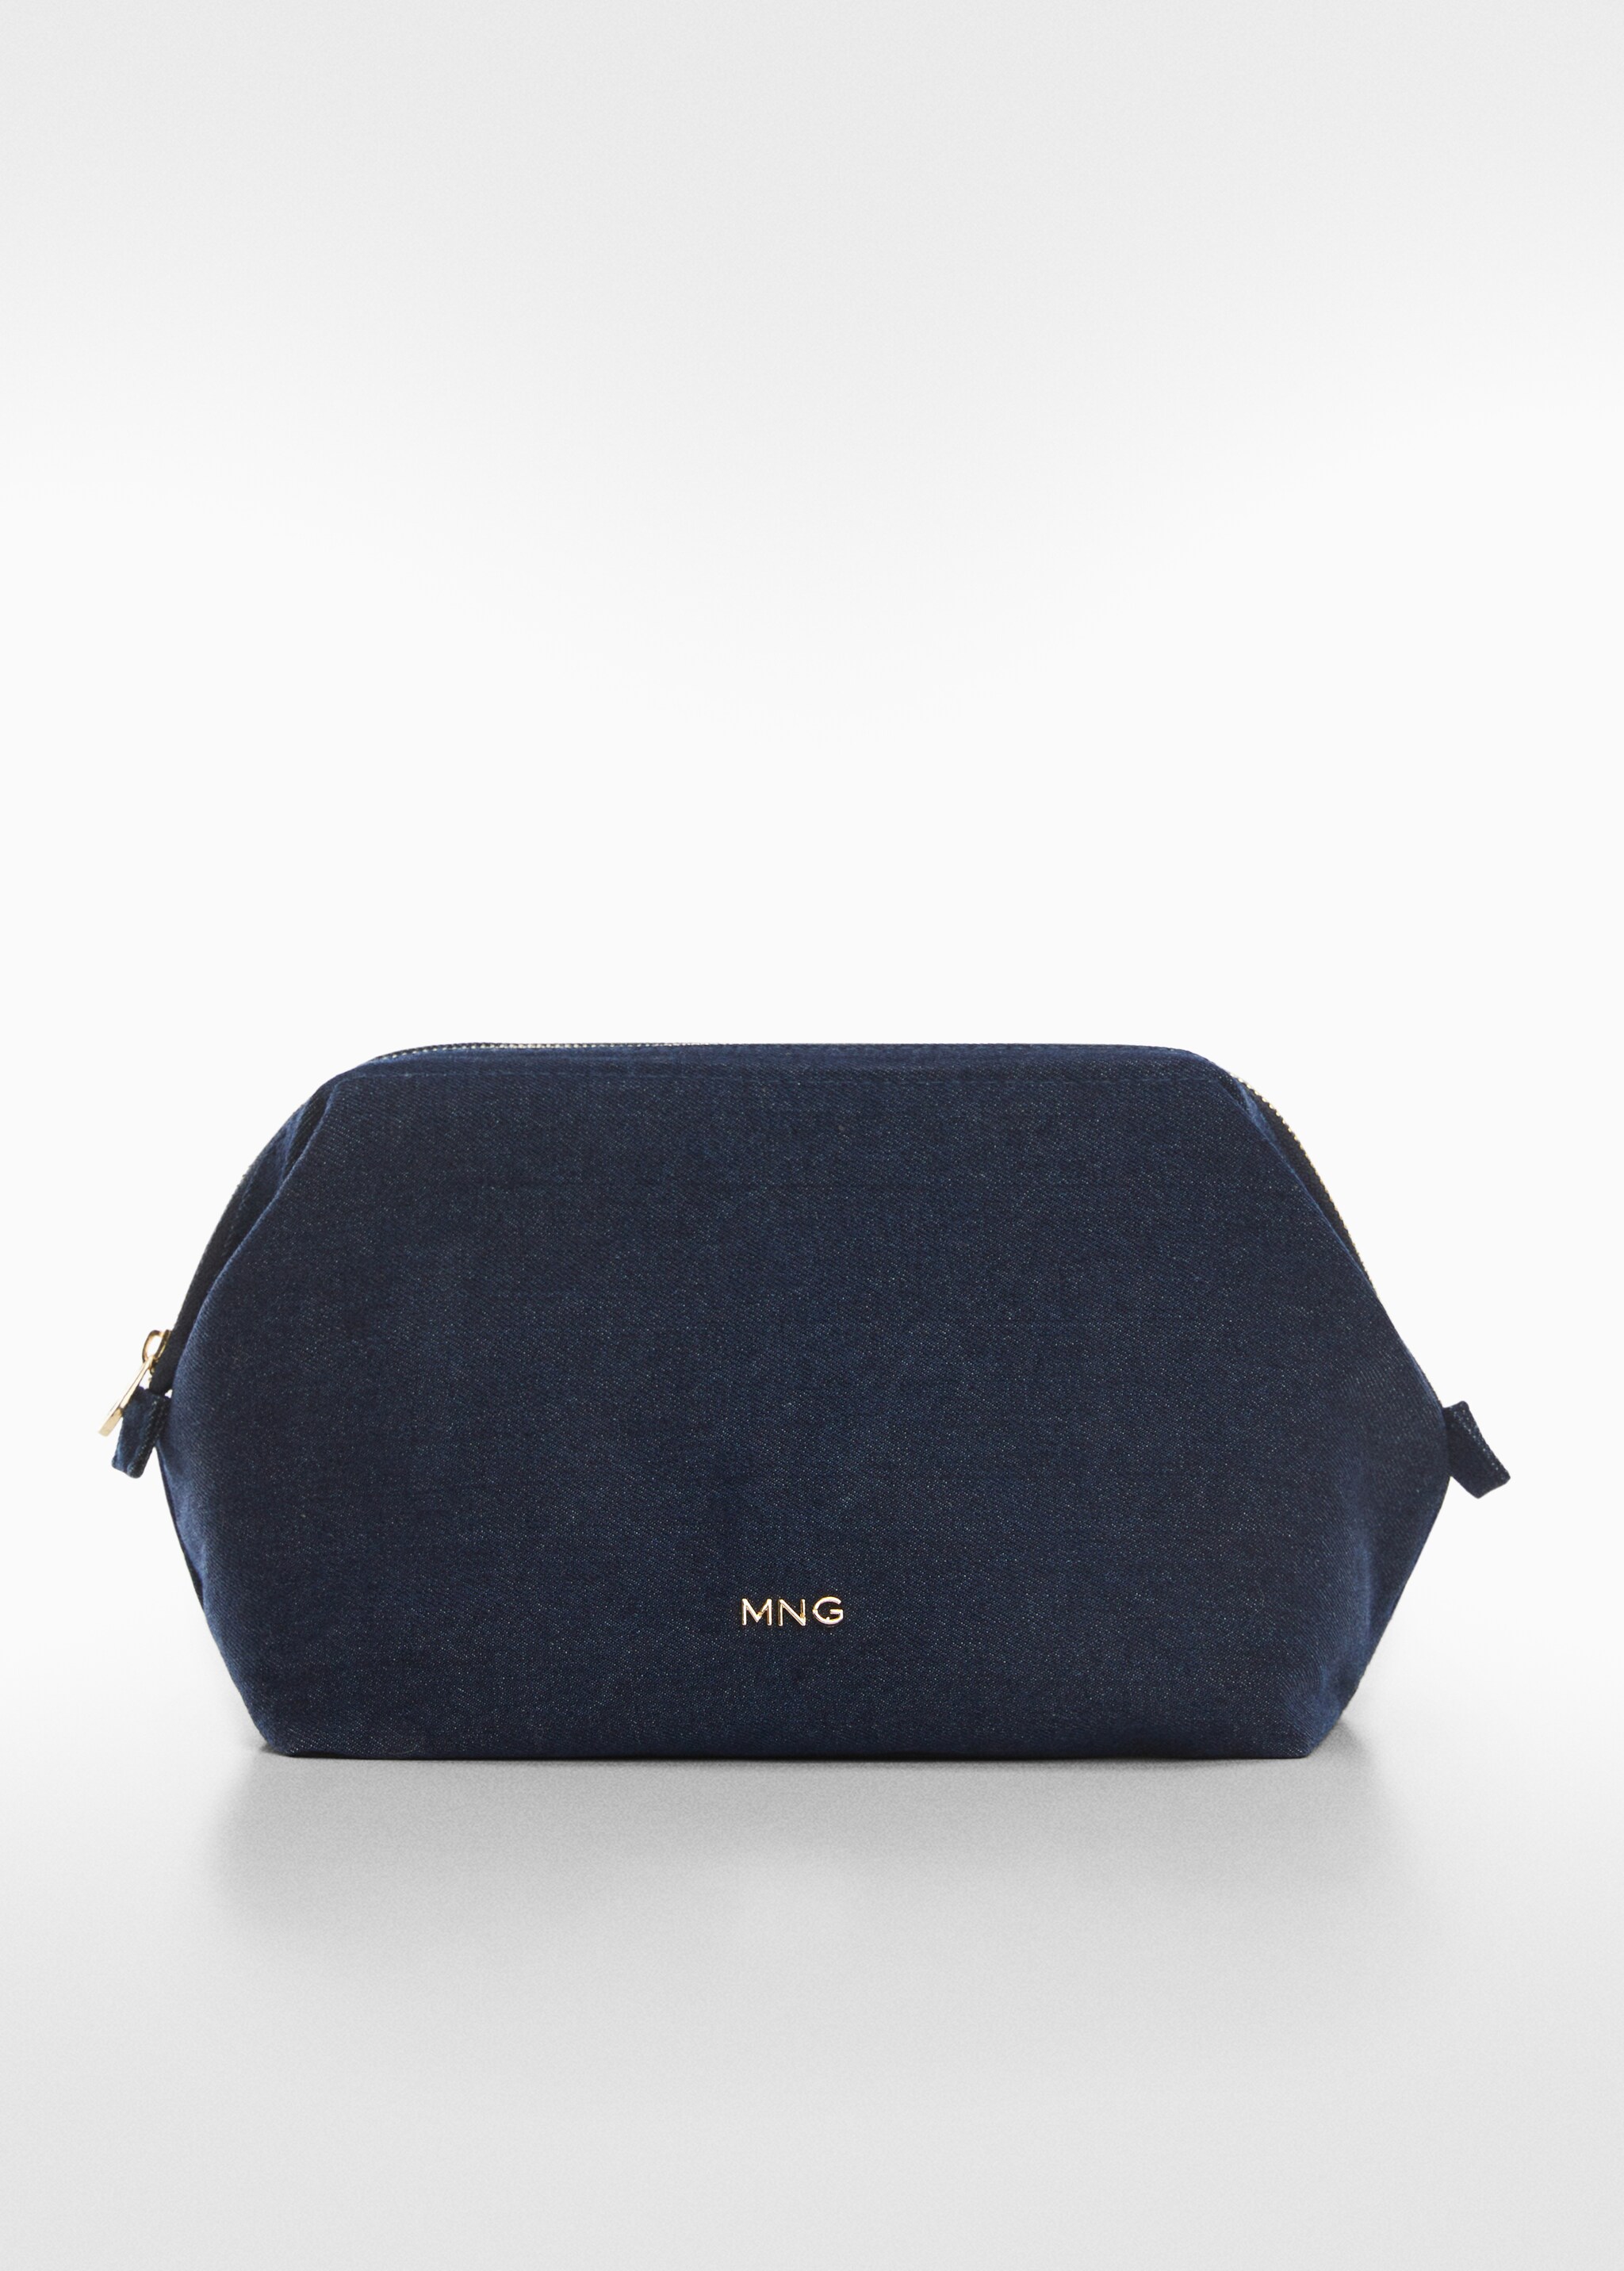 Denim toiletry bag - Article without model